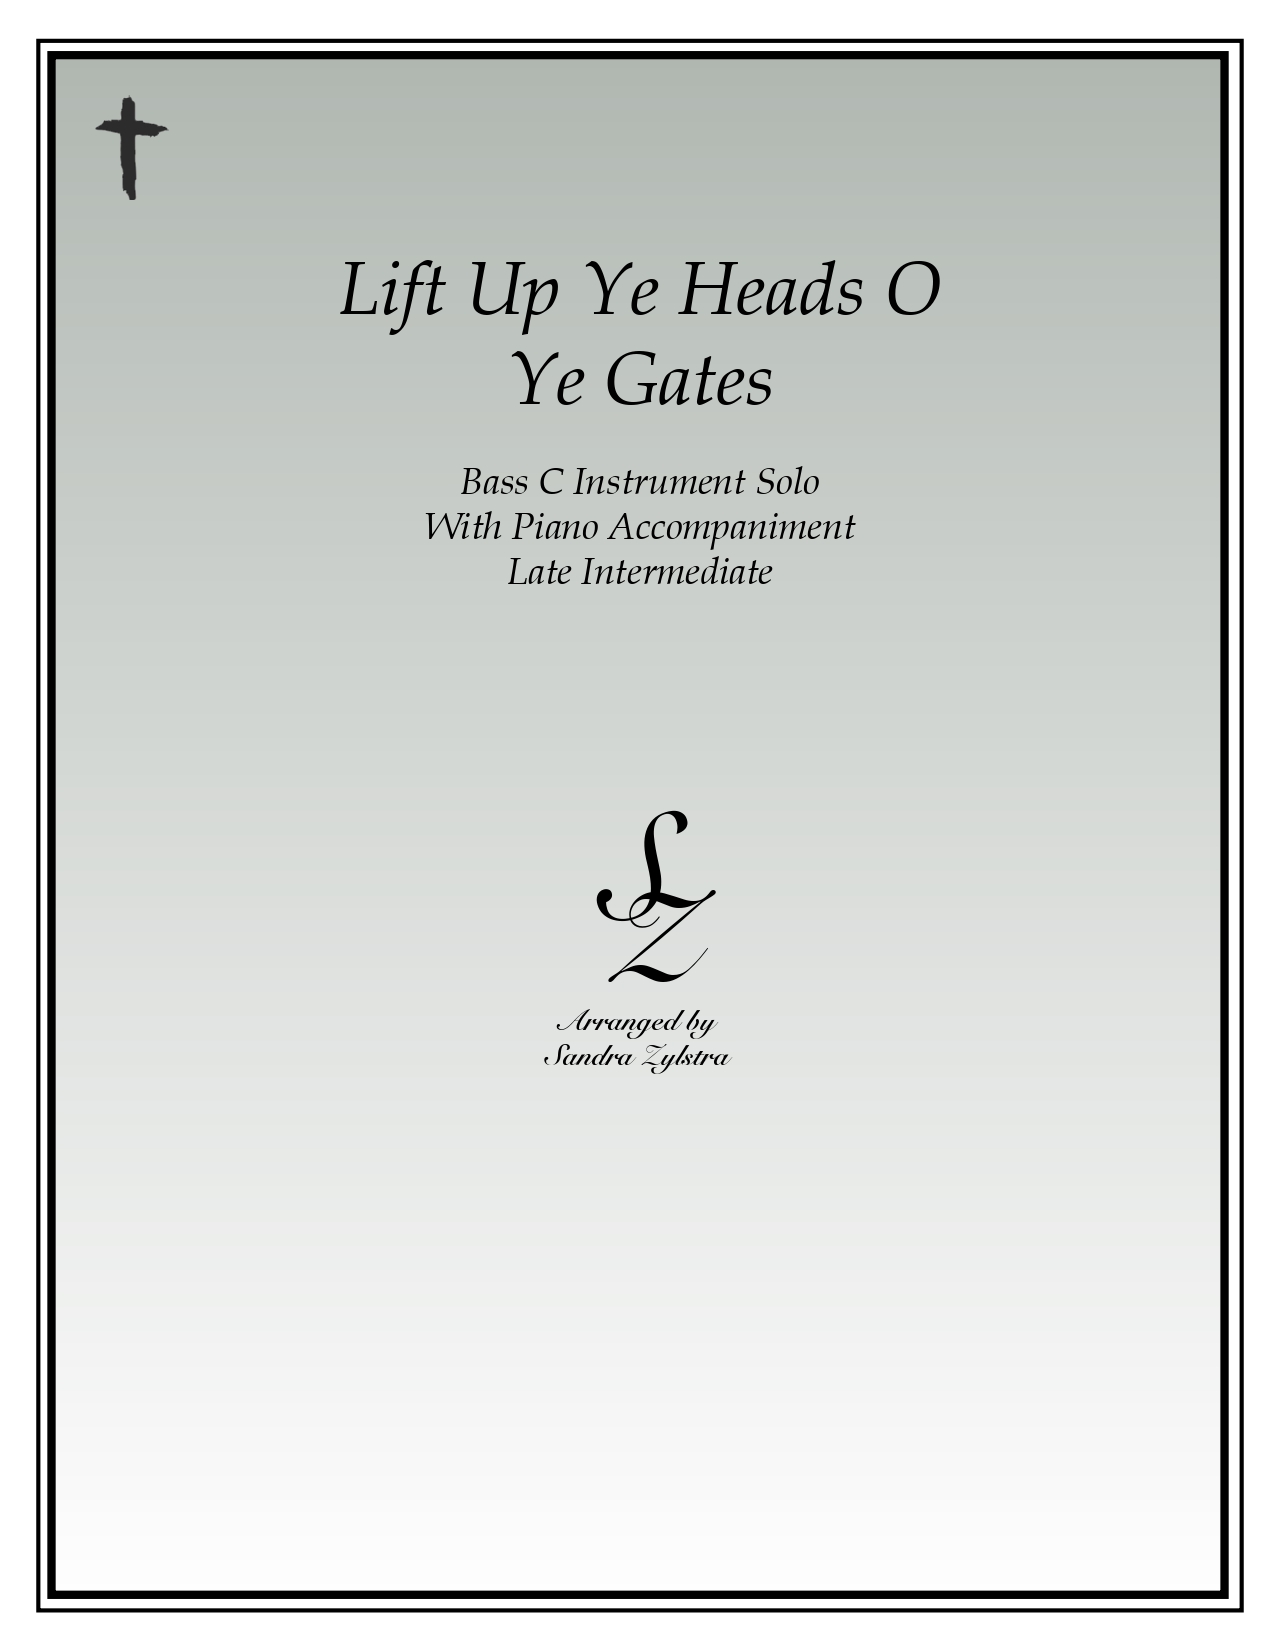 Lift Up Ye Heads O Ye Gates bass C instrument solo part cover page 00011